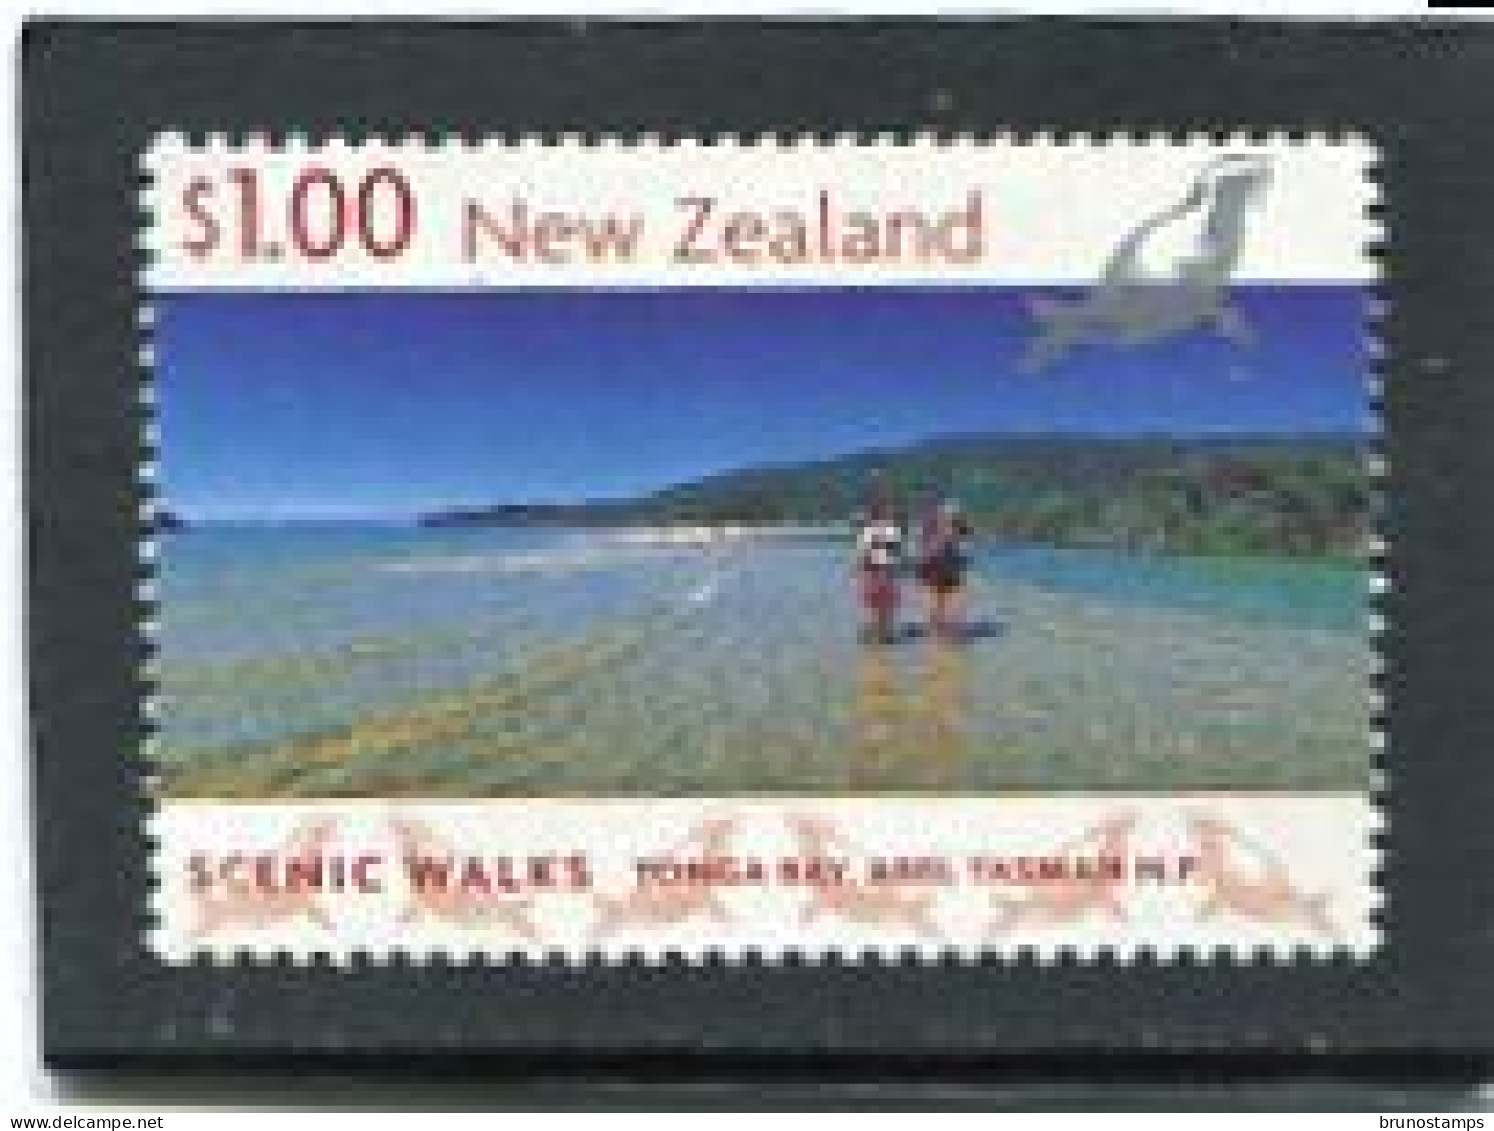 NEW ZEALAND - 1999  1$  SCENIC WALKS  FINE  USED - Used Stamps